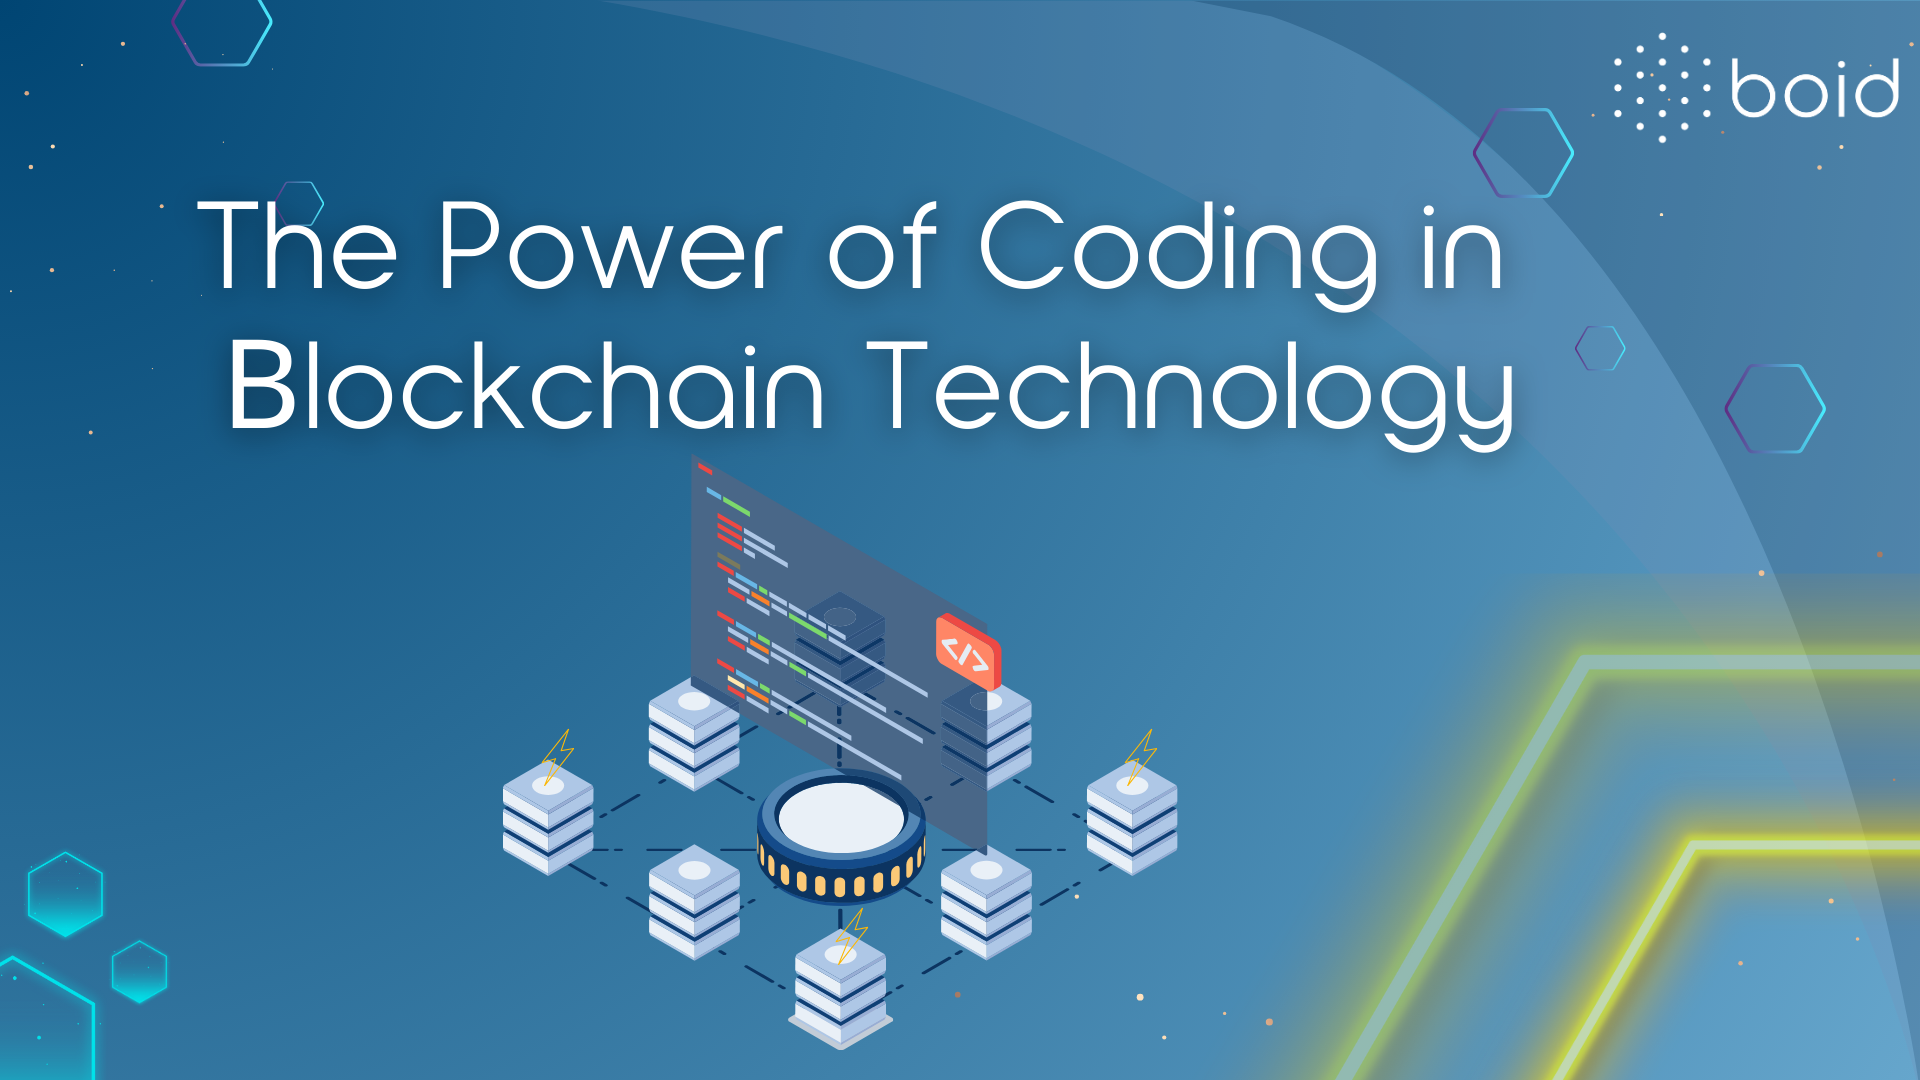 The Power of Coding in Blockchain Technology